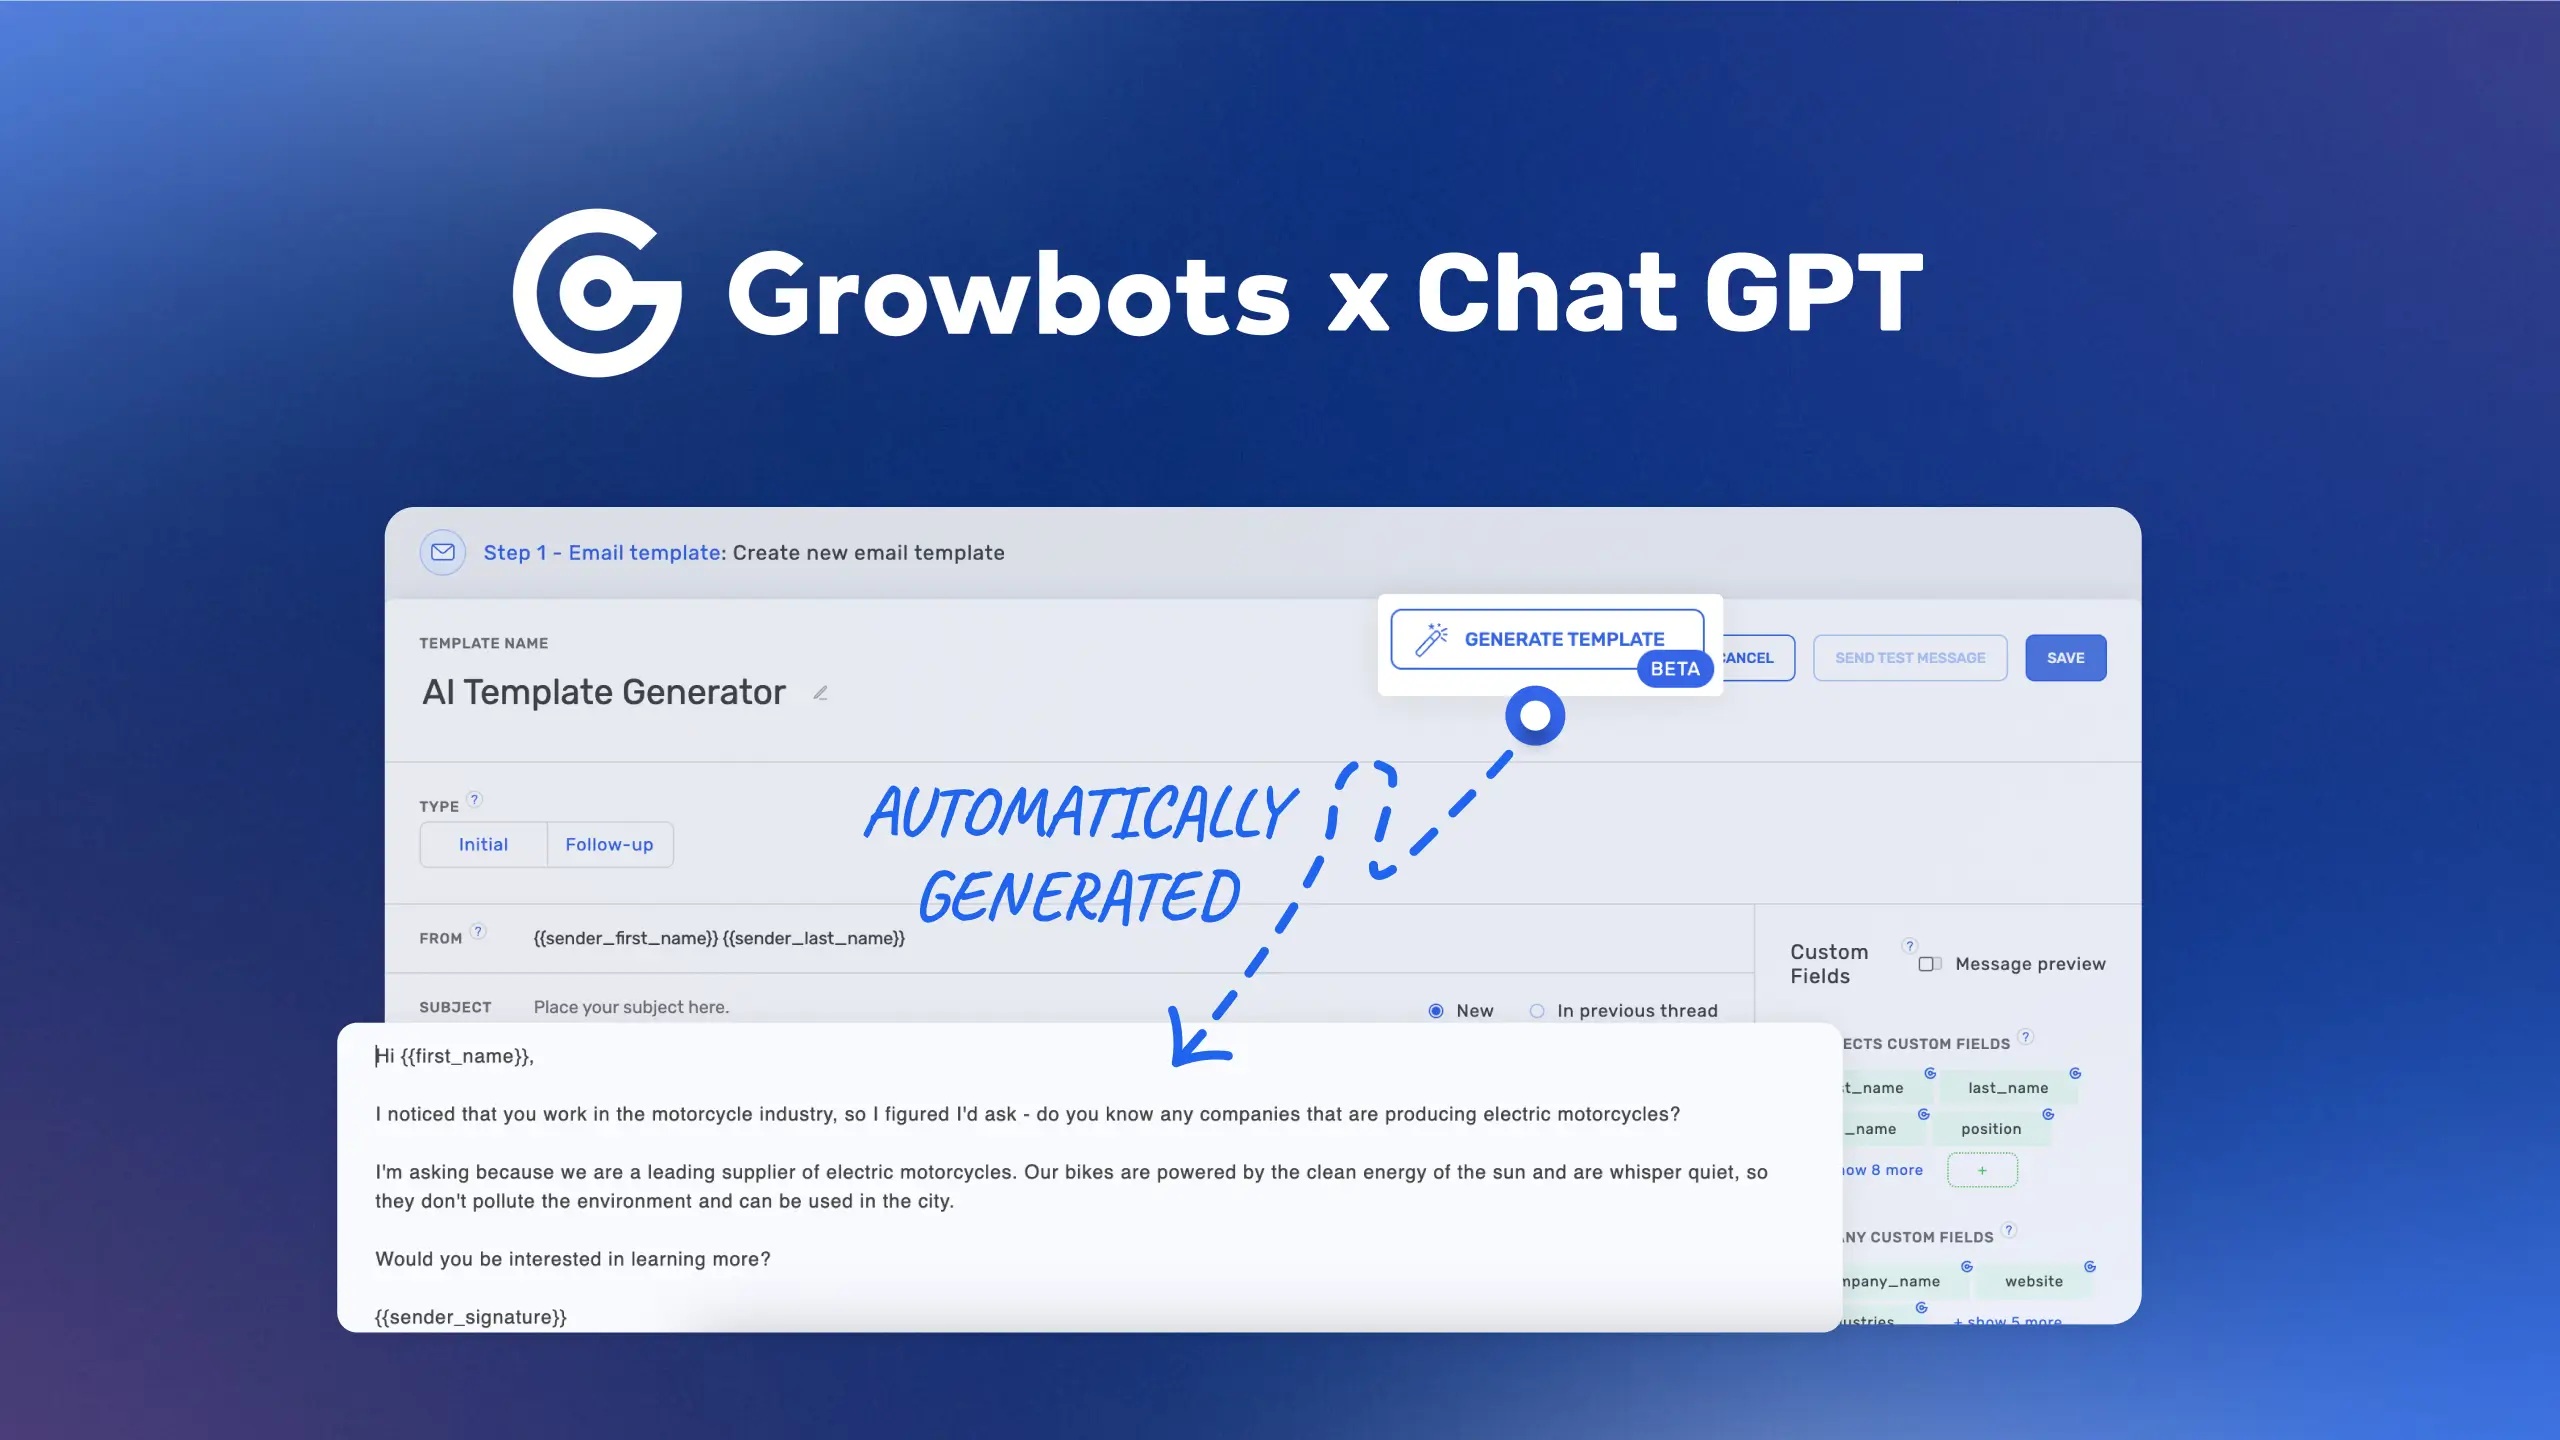 Generating cold emails with AI - AI Template Generator by Growbots